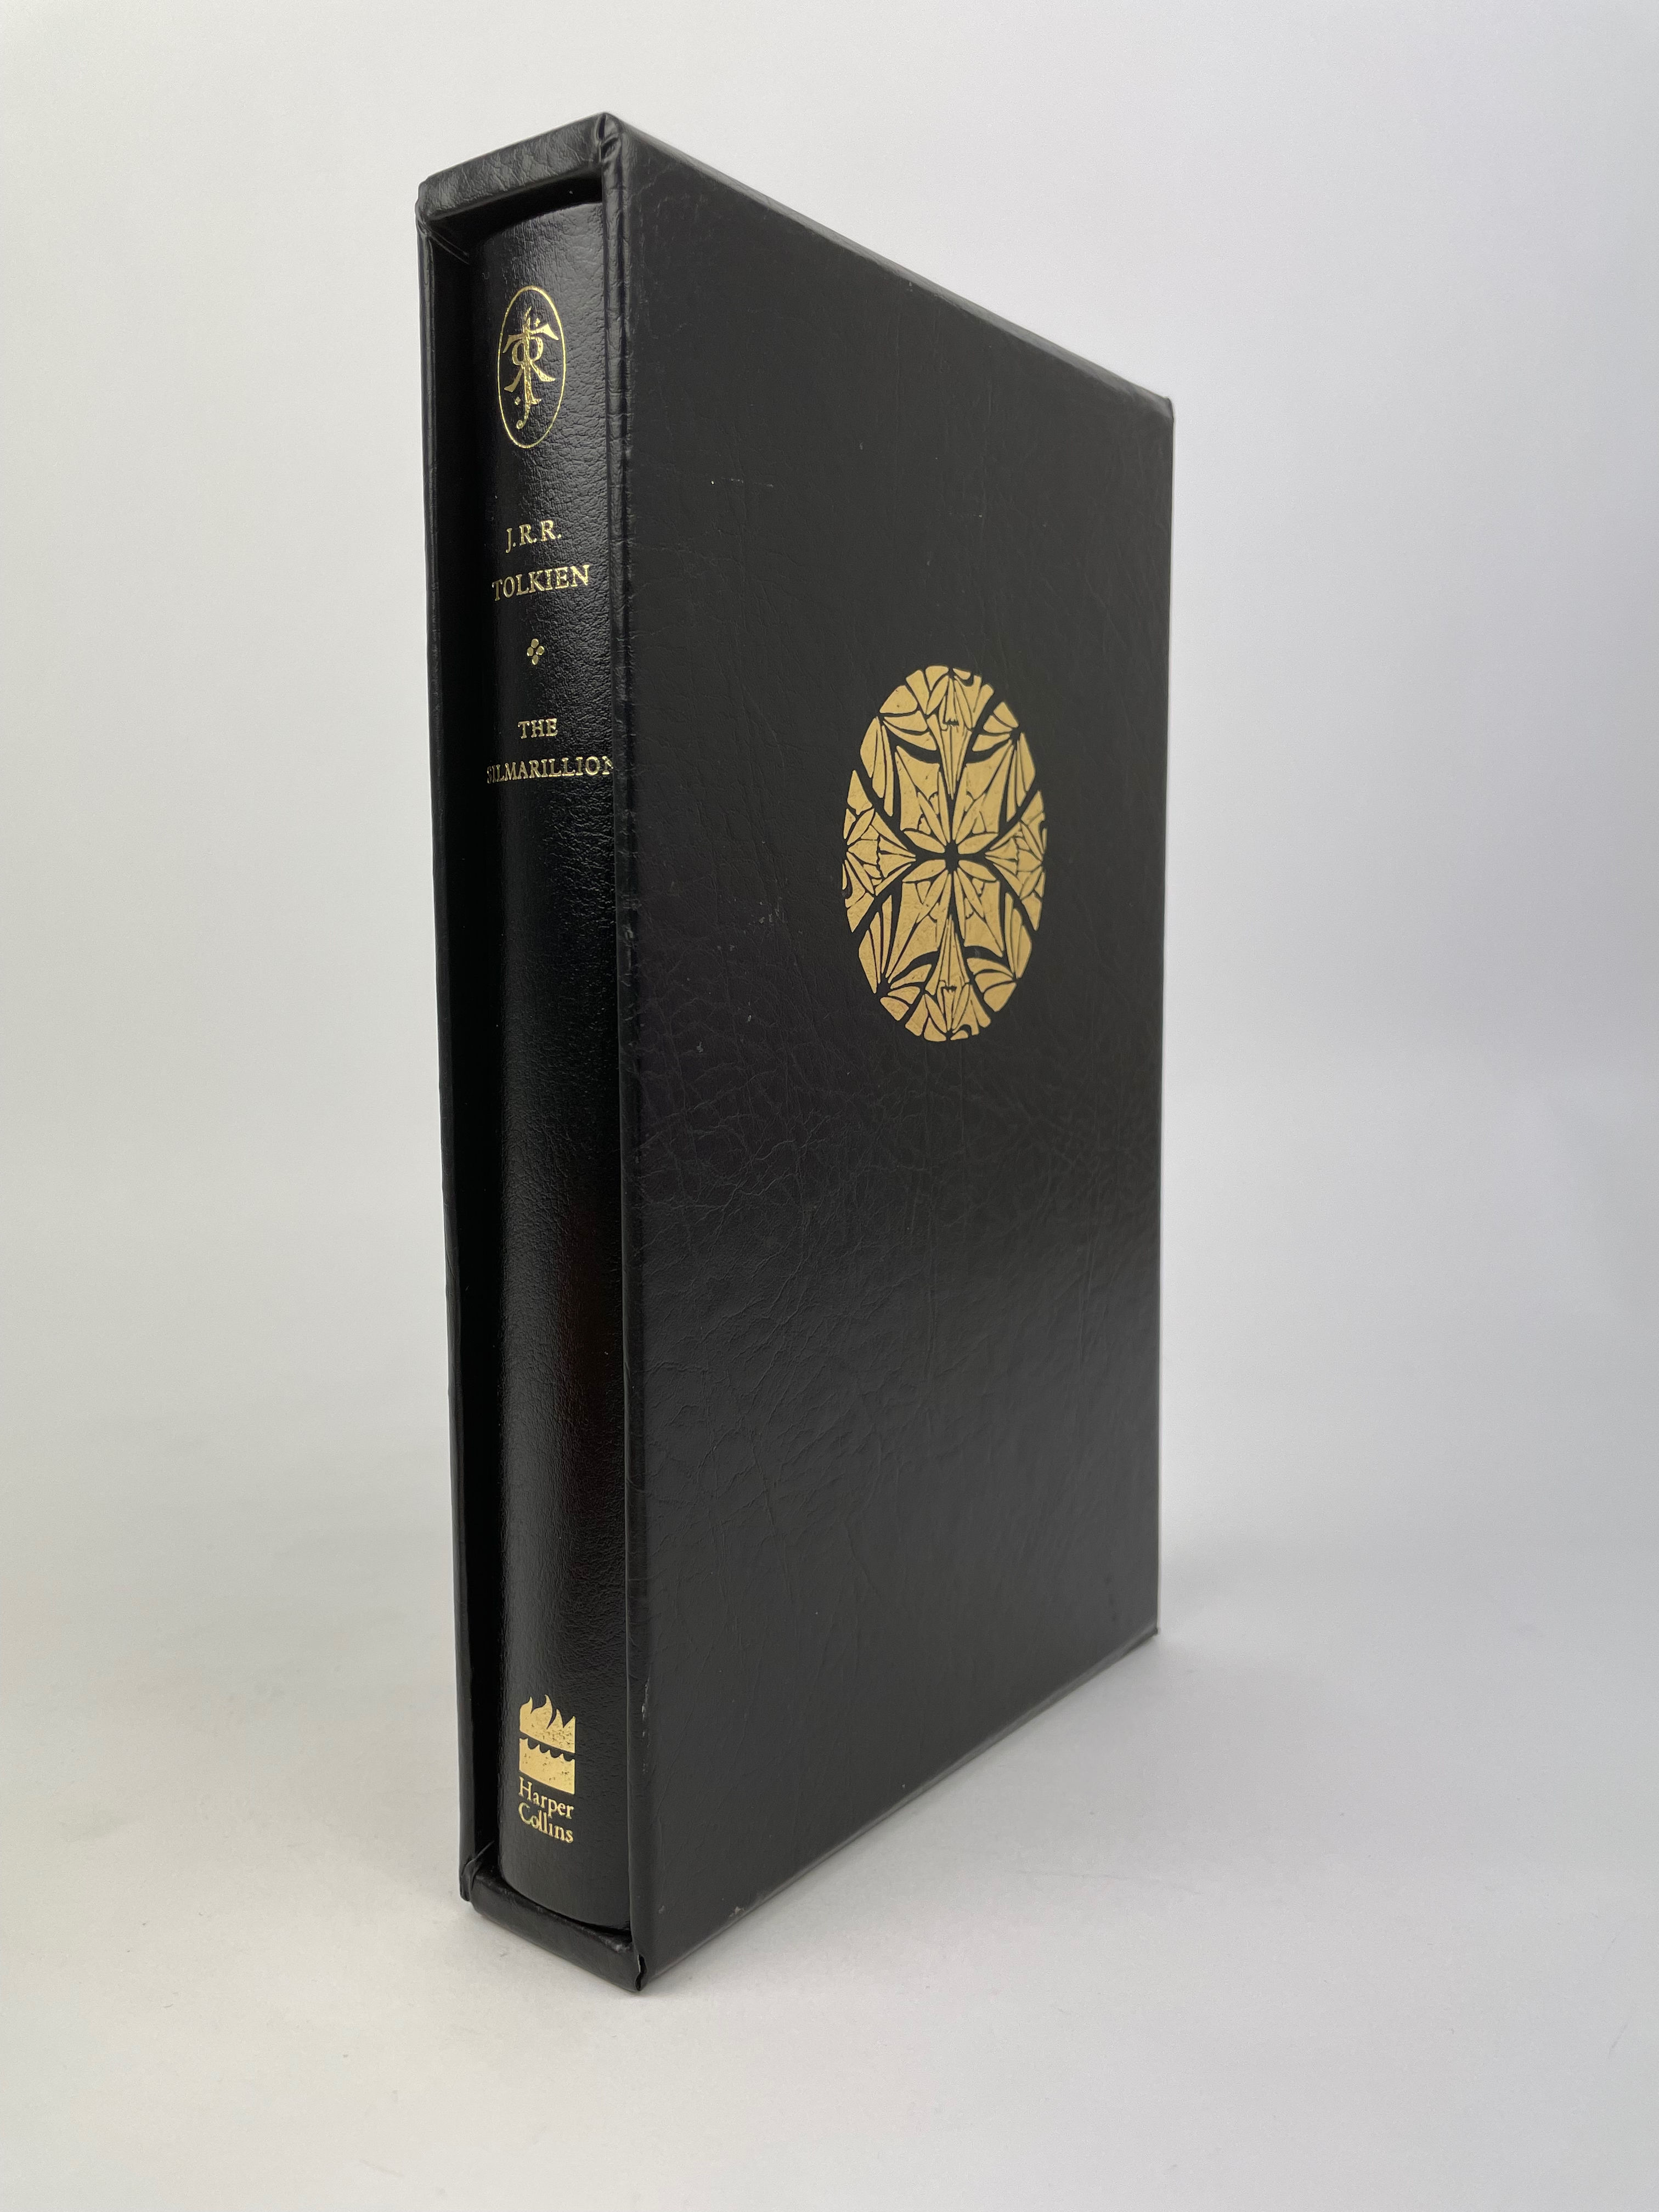 Harper Collins Publishers, the 1st printing of the 2002 Deluxe Limited Edition.  Quarter Bound in Black Leather with Gilt title, Author, Publisher and Tolkien Monogram to the spine